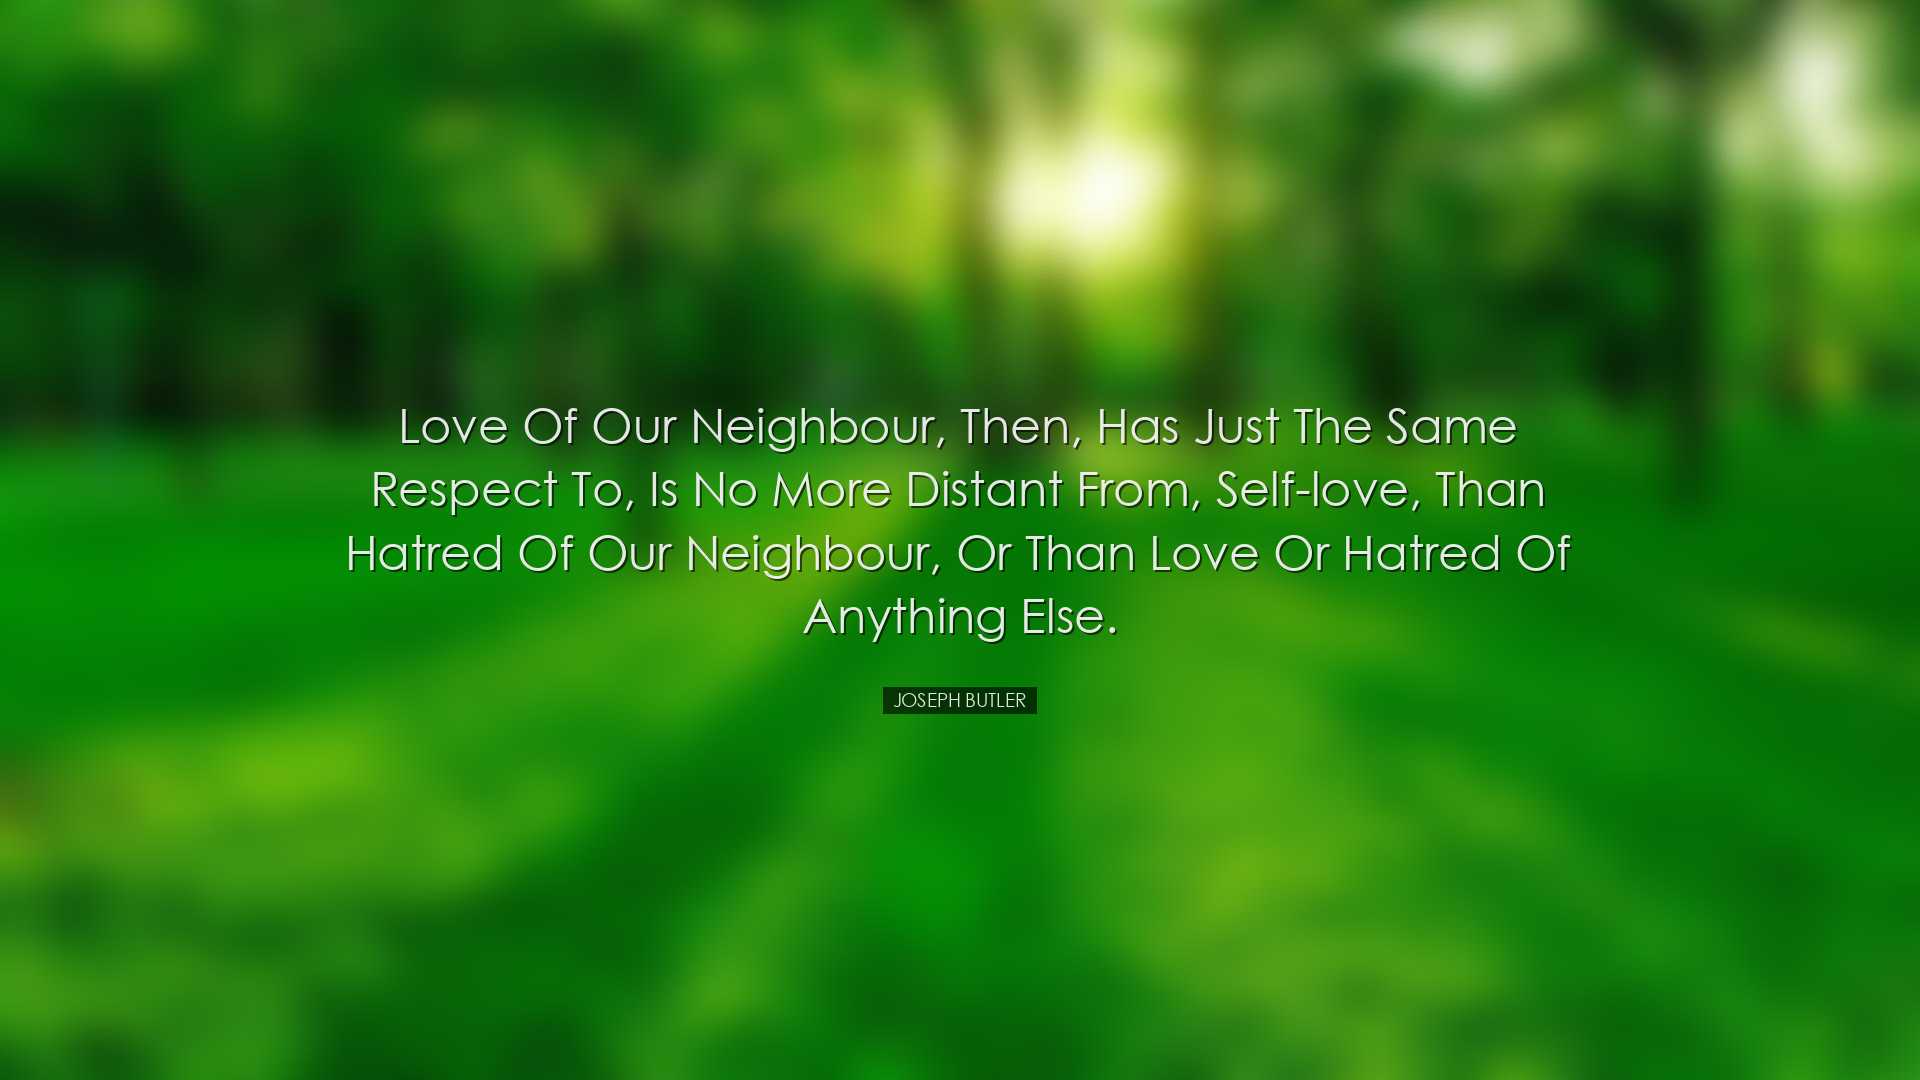 Love of our neighbour, then, has just the same respect to, is no m